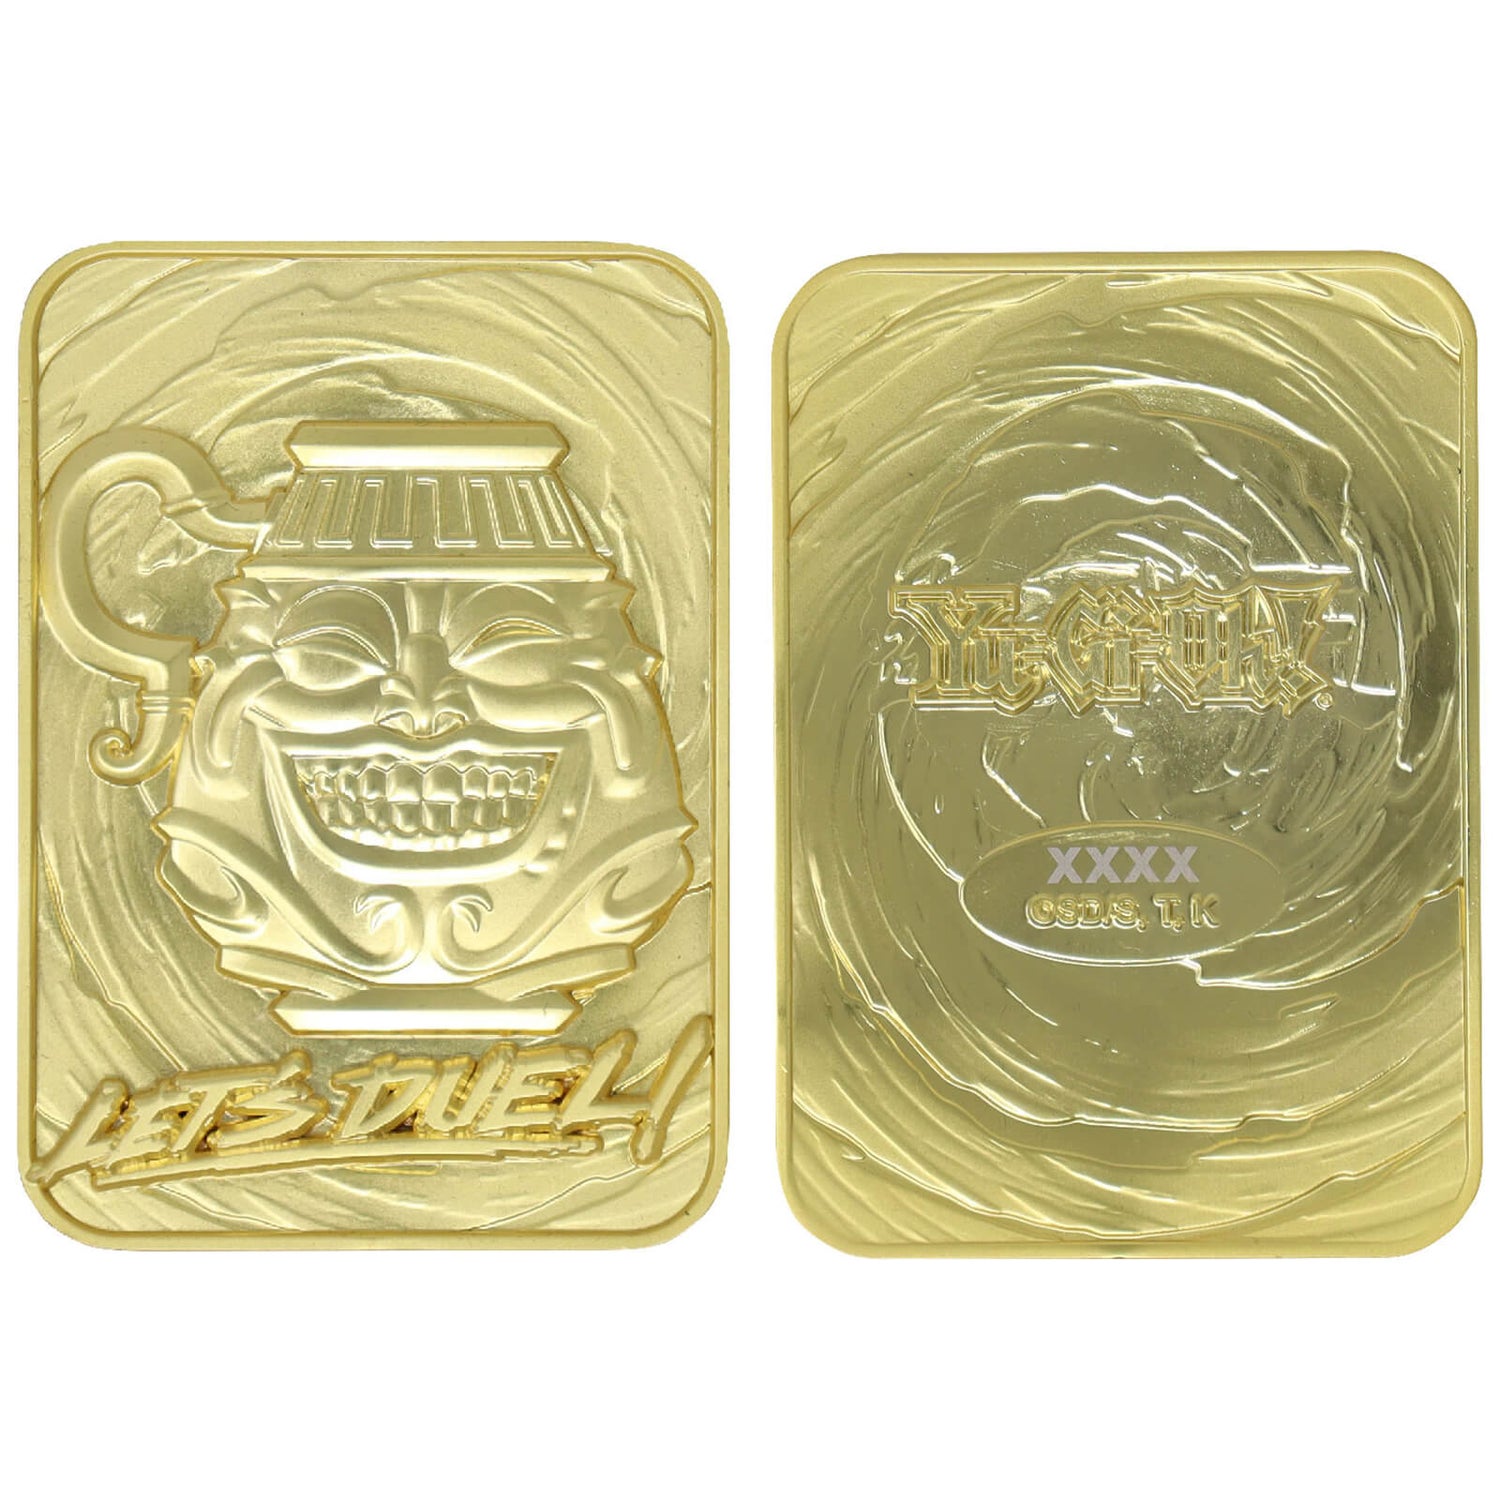 Fanattik: Yu-Gi-Oh! Limited Edition 24K Gold Plated Collectible - Pot of Greed